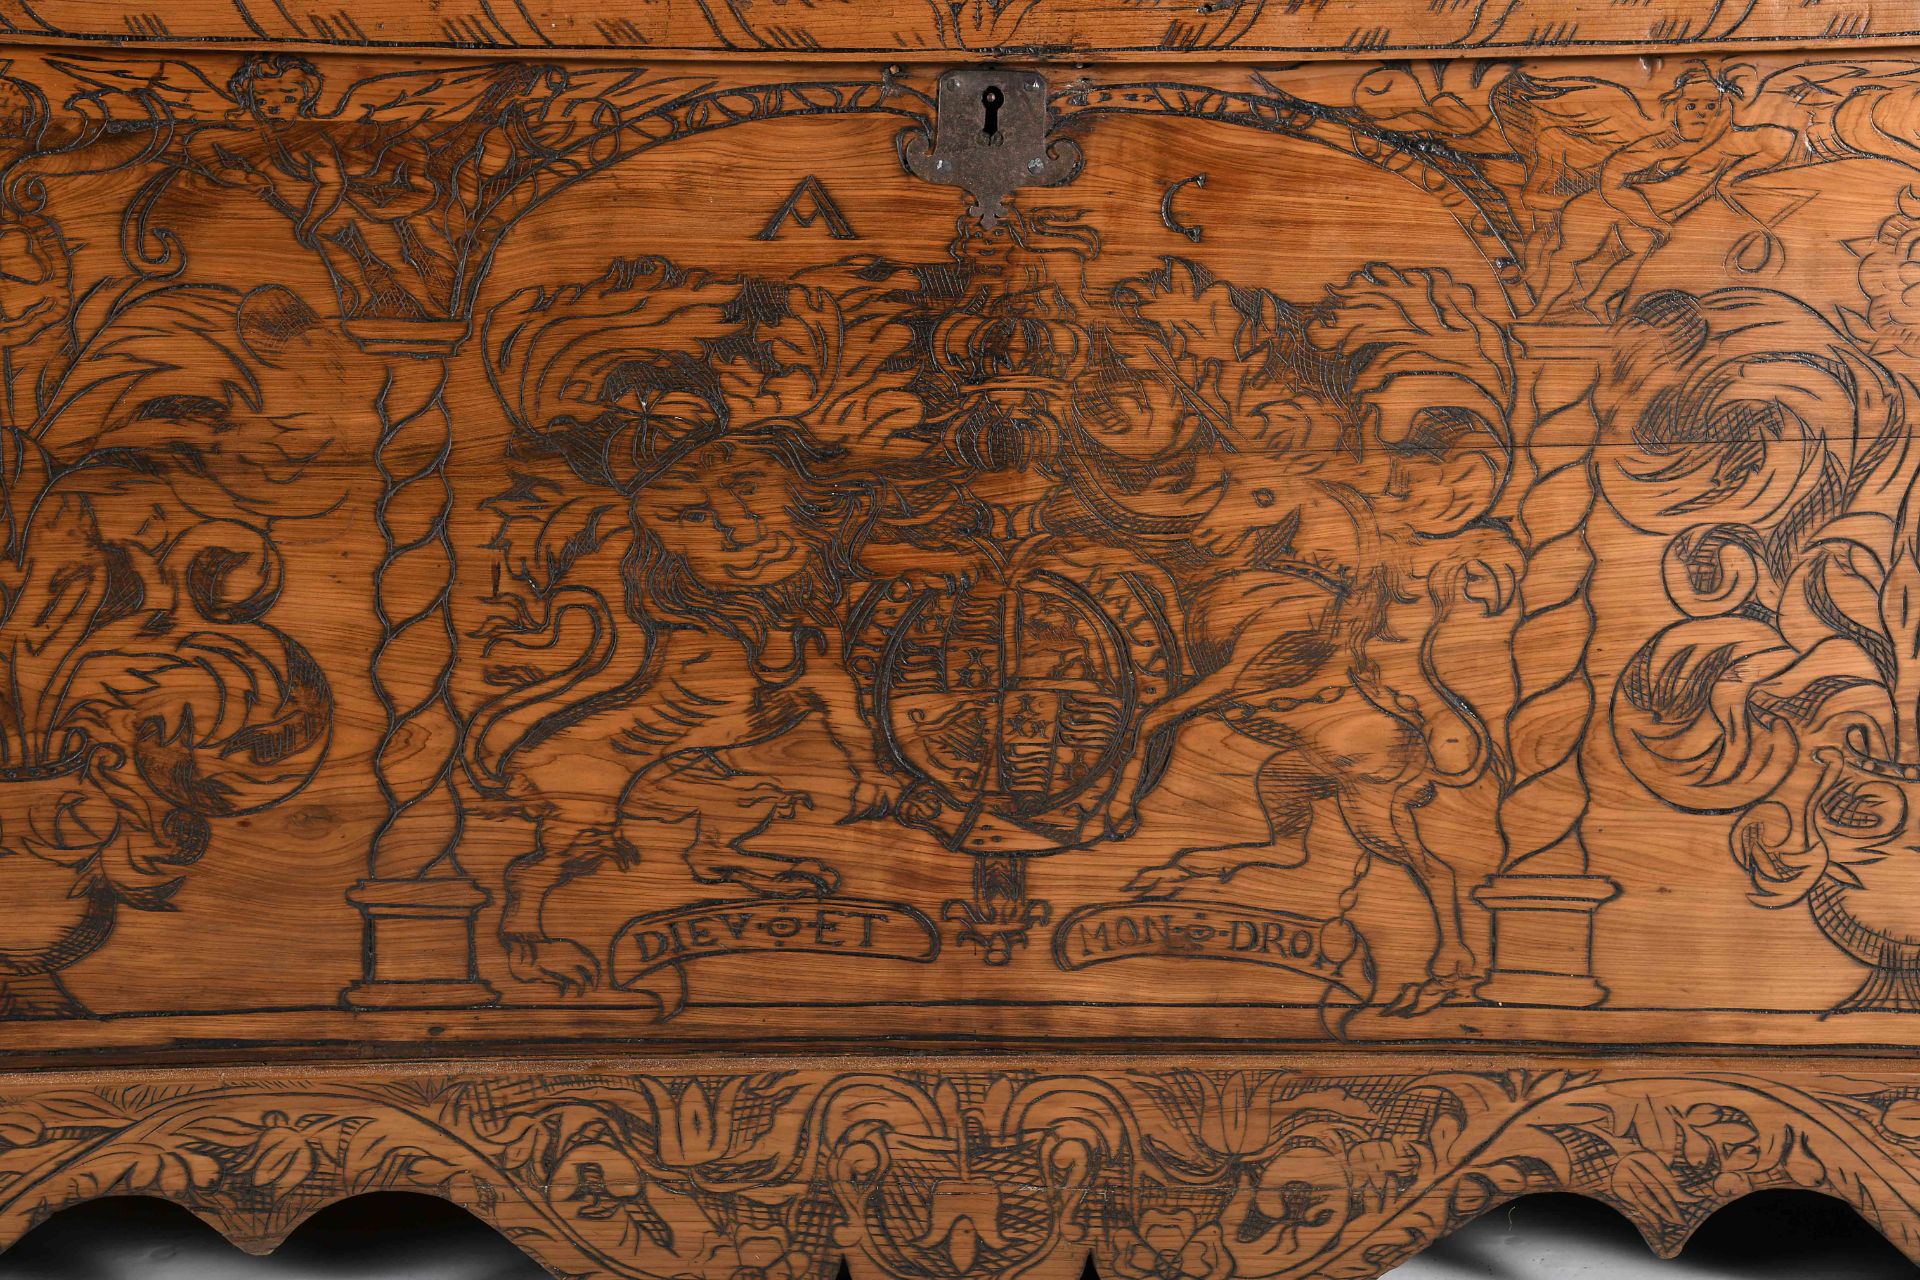 A grooved decoration large chest with solles - 1687 - Image 2 of 4